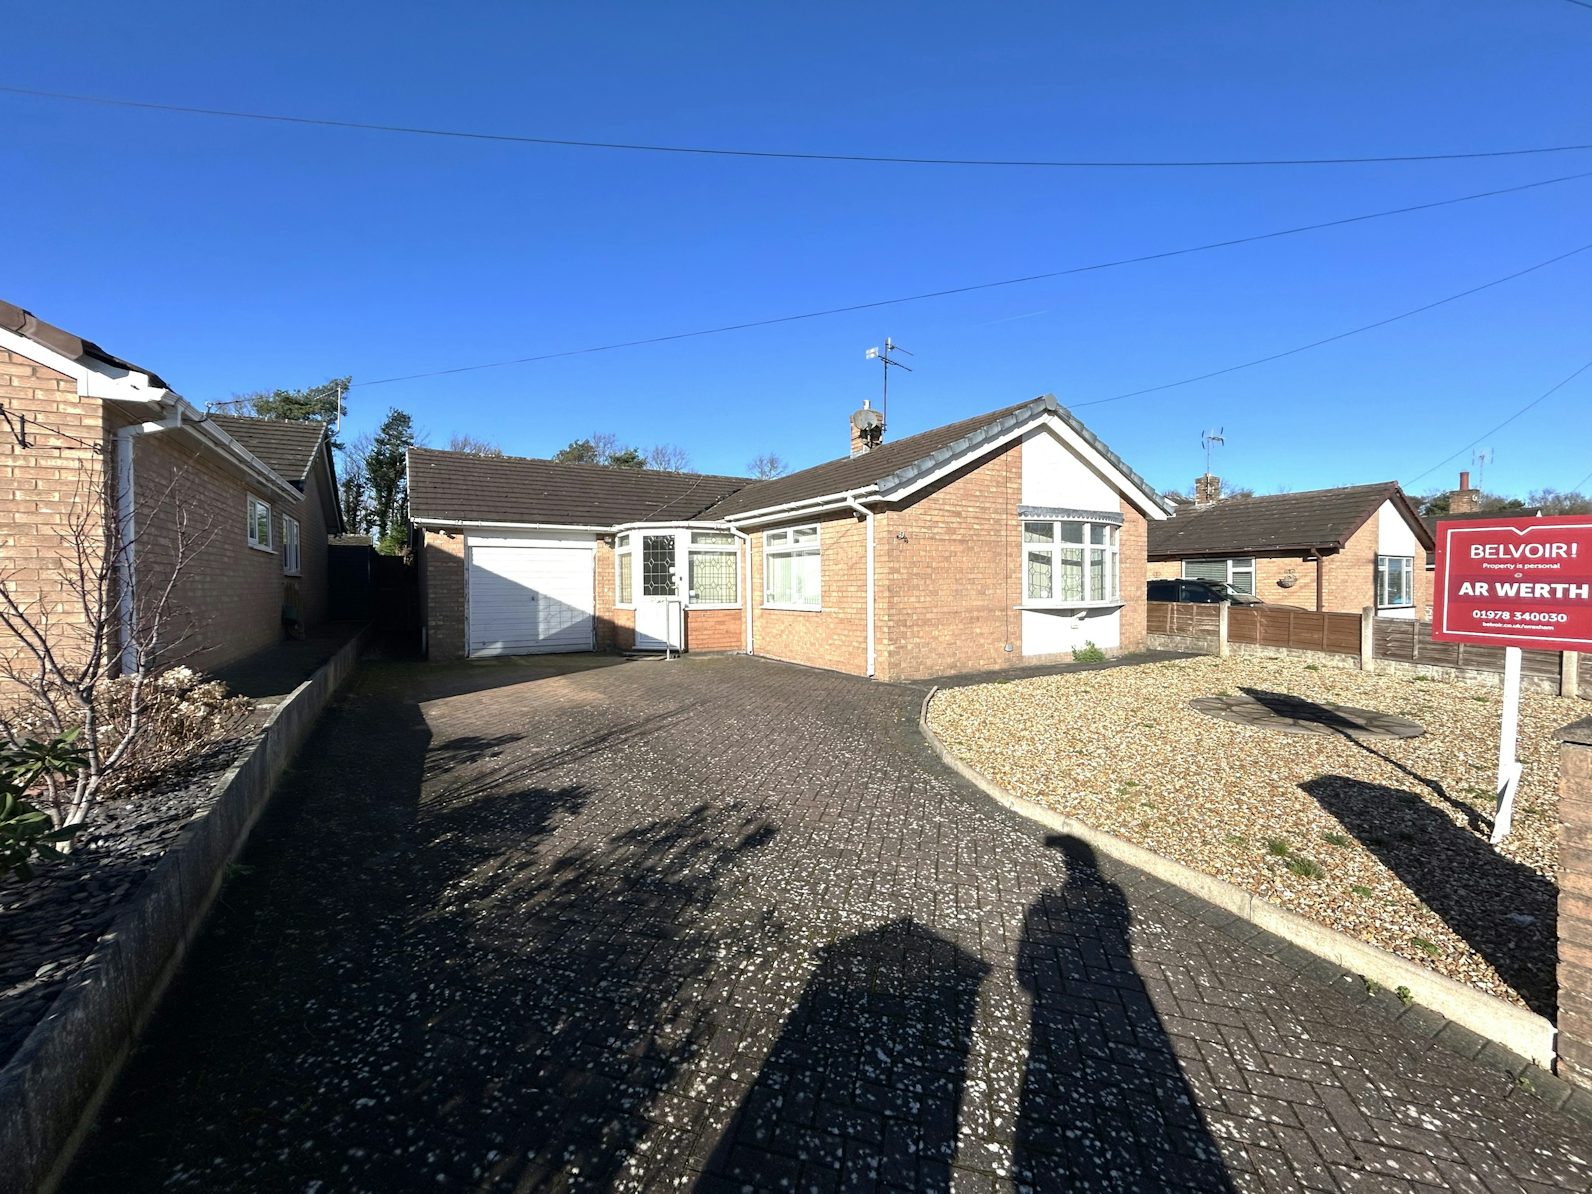 Bungalow for sale on Hampshire Drive Wrexham, LL11